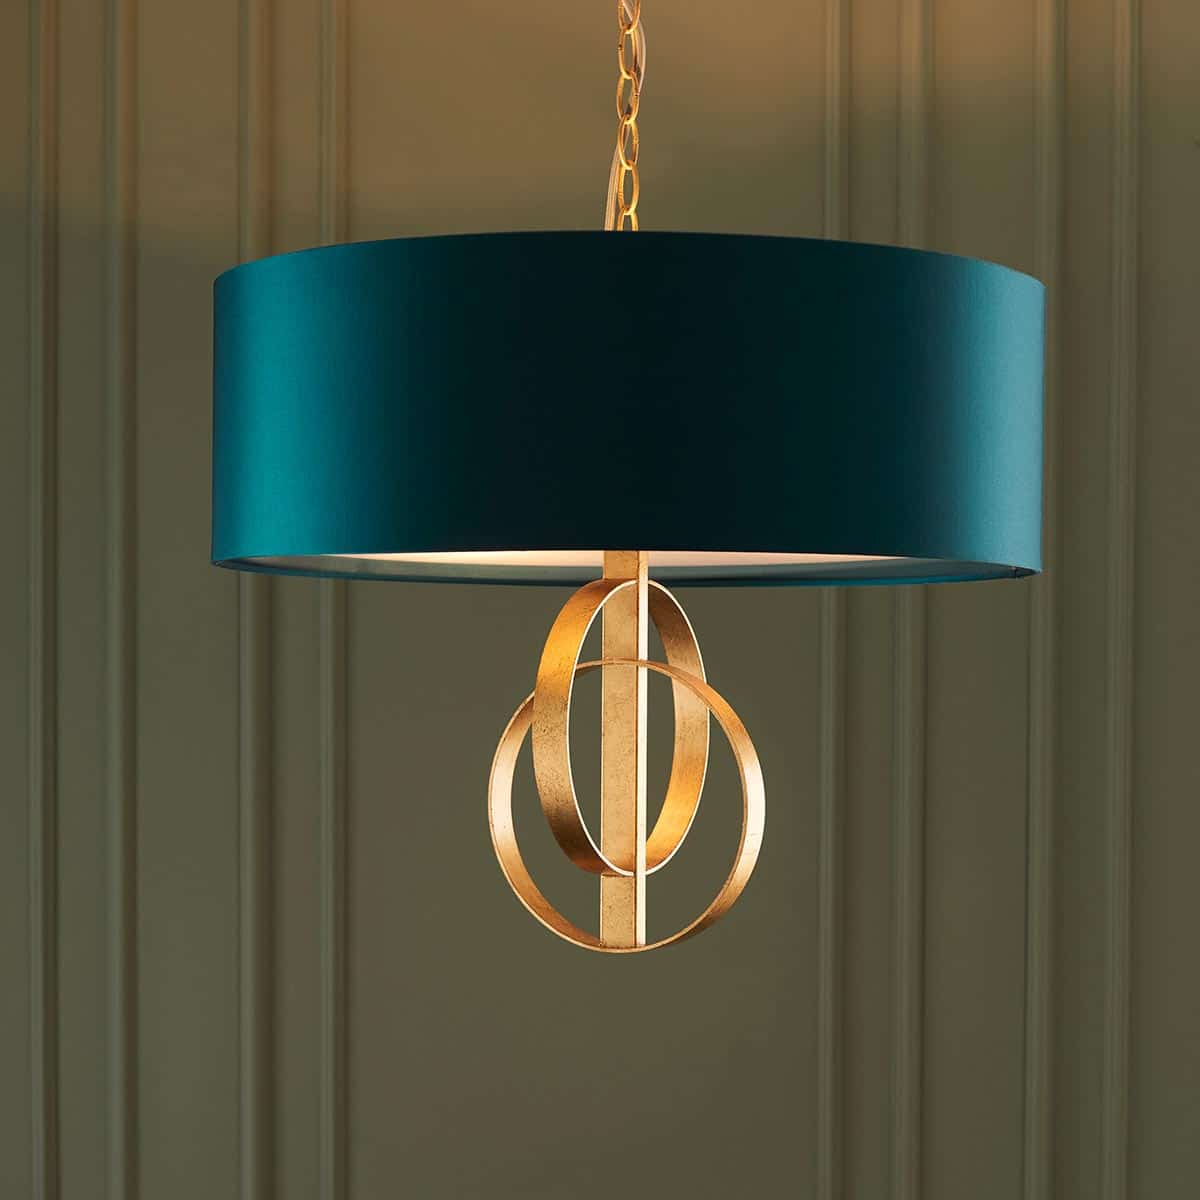 Stylish Double Hoop 3 Light Ceiling Pendant Gold Leaf 60cm Teal Shade